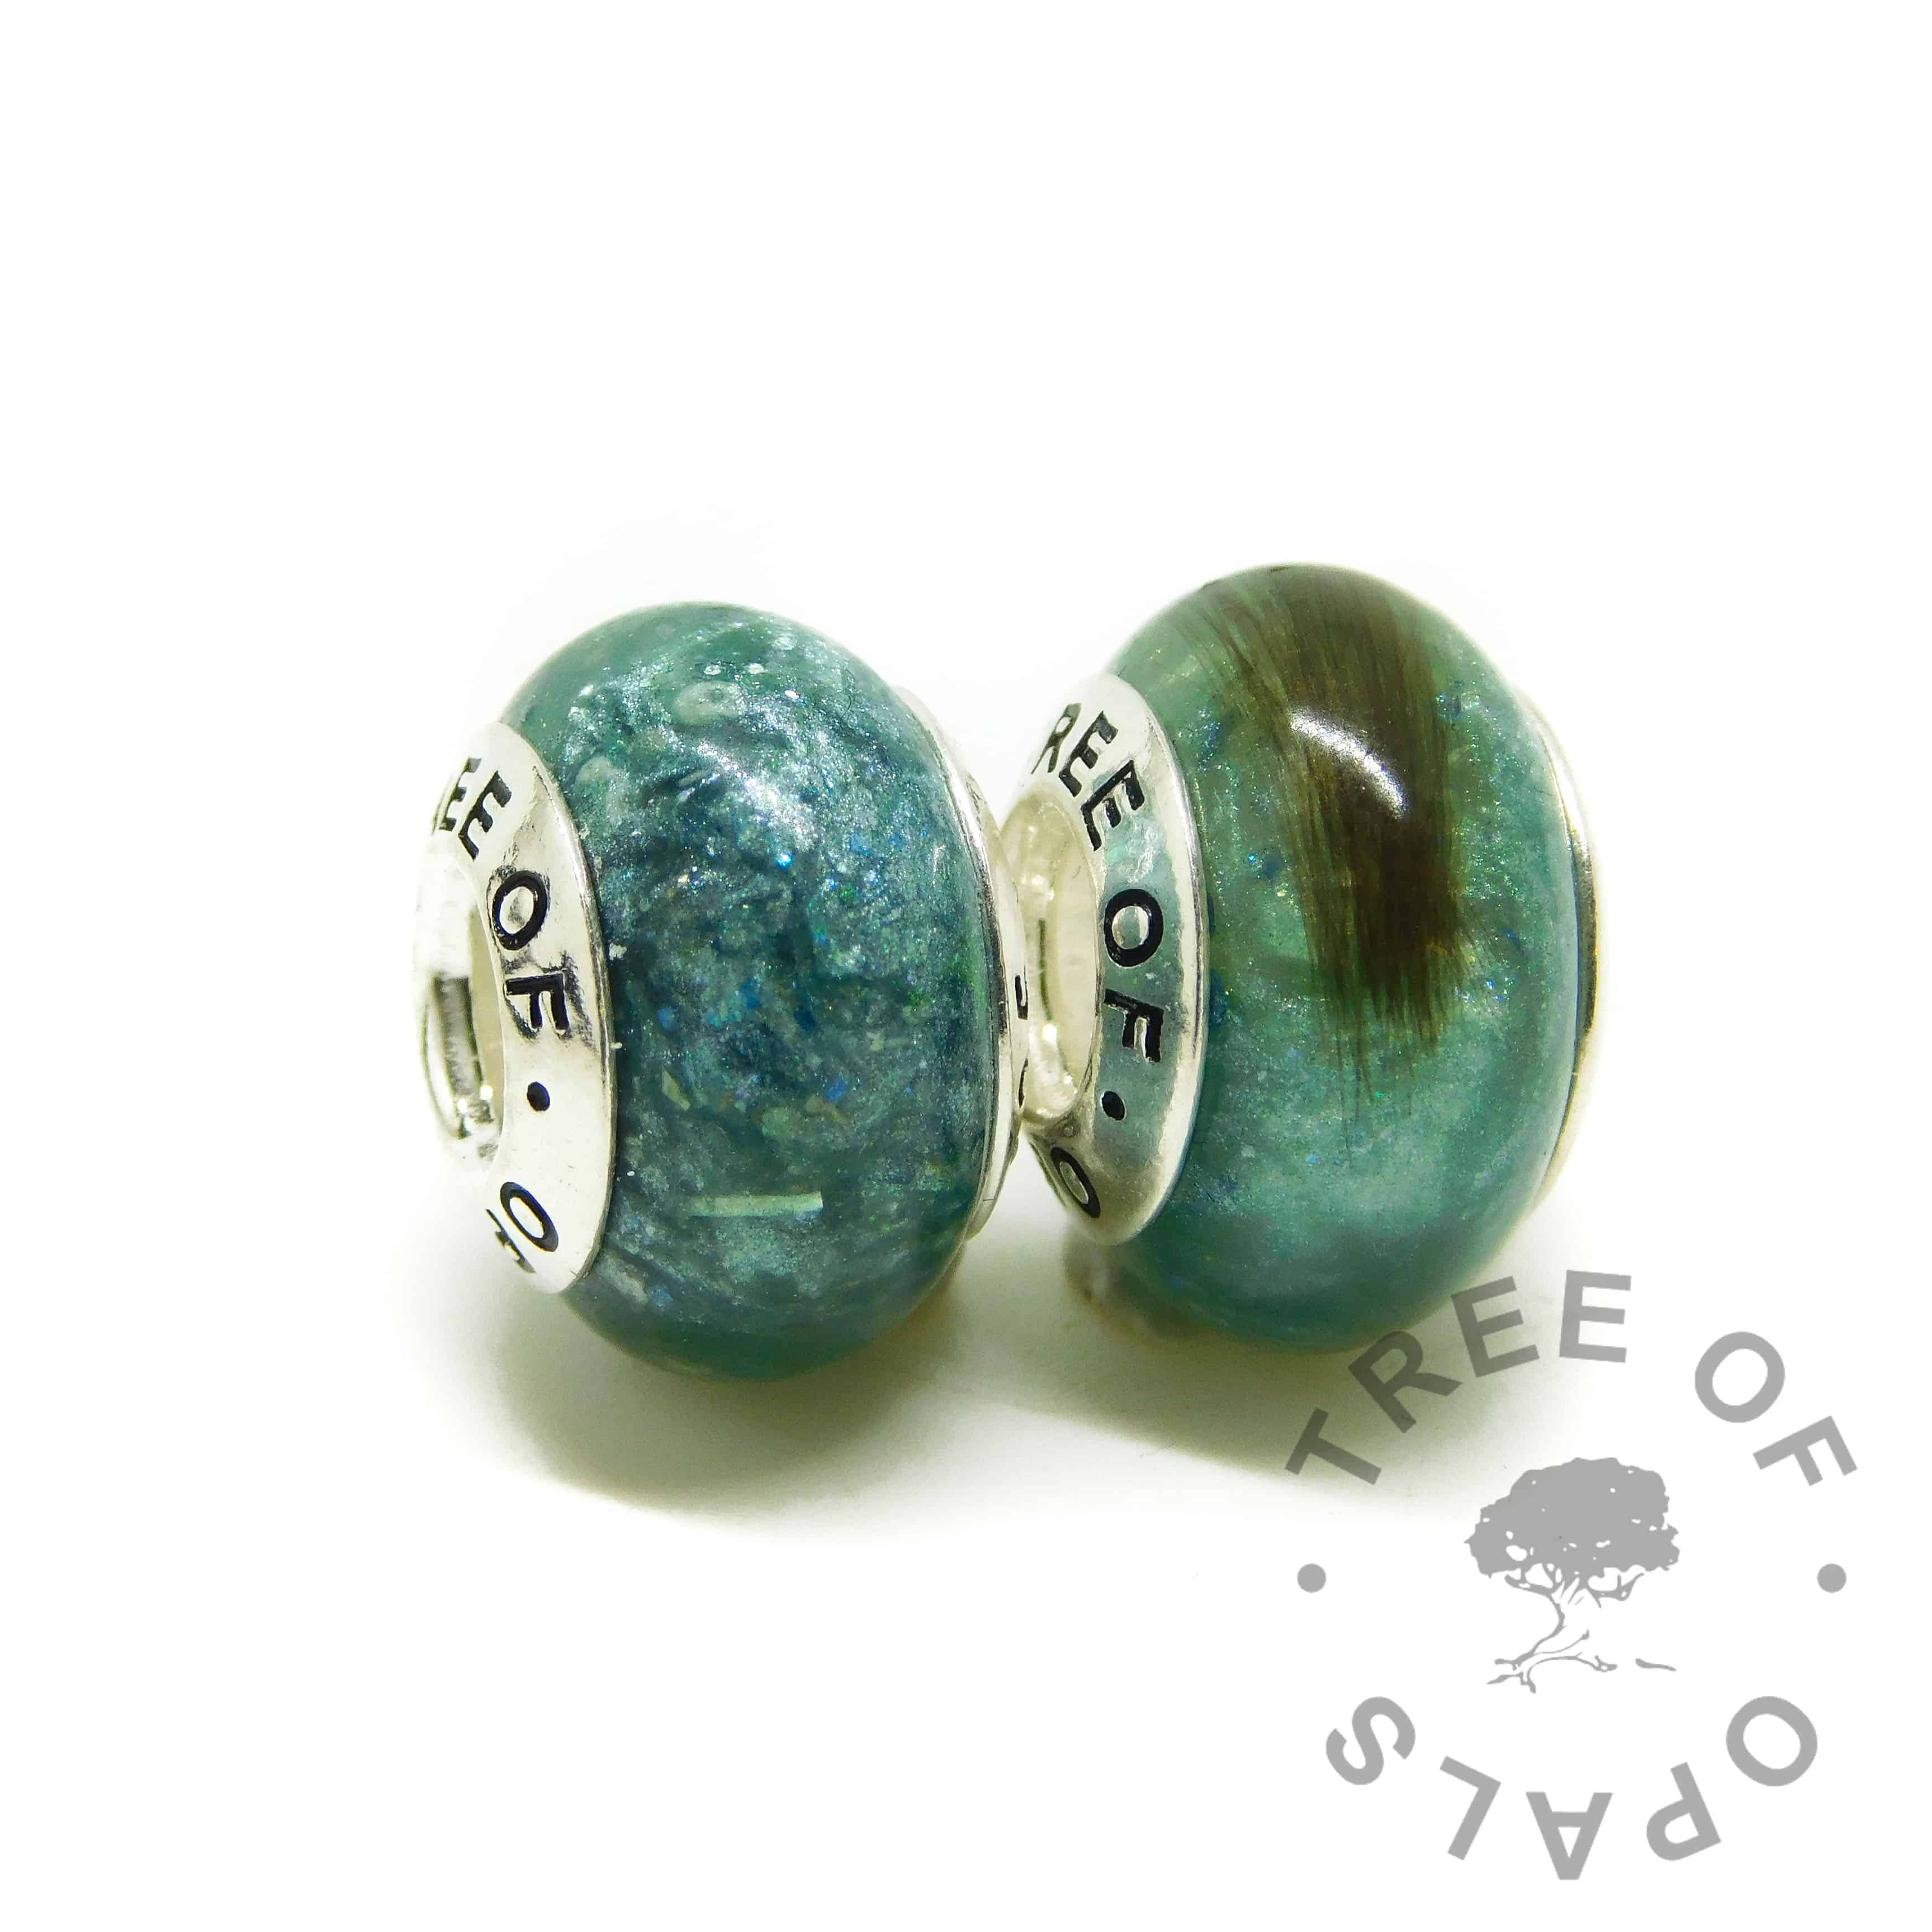 ashes and hair charm duo with Tree of Opals core, mermaid teal resin sparkle mix cremation ashes and lock of hair charm beads